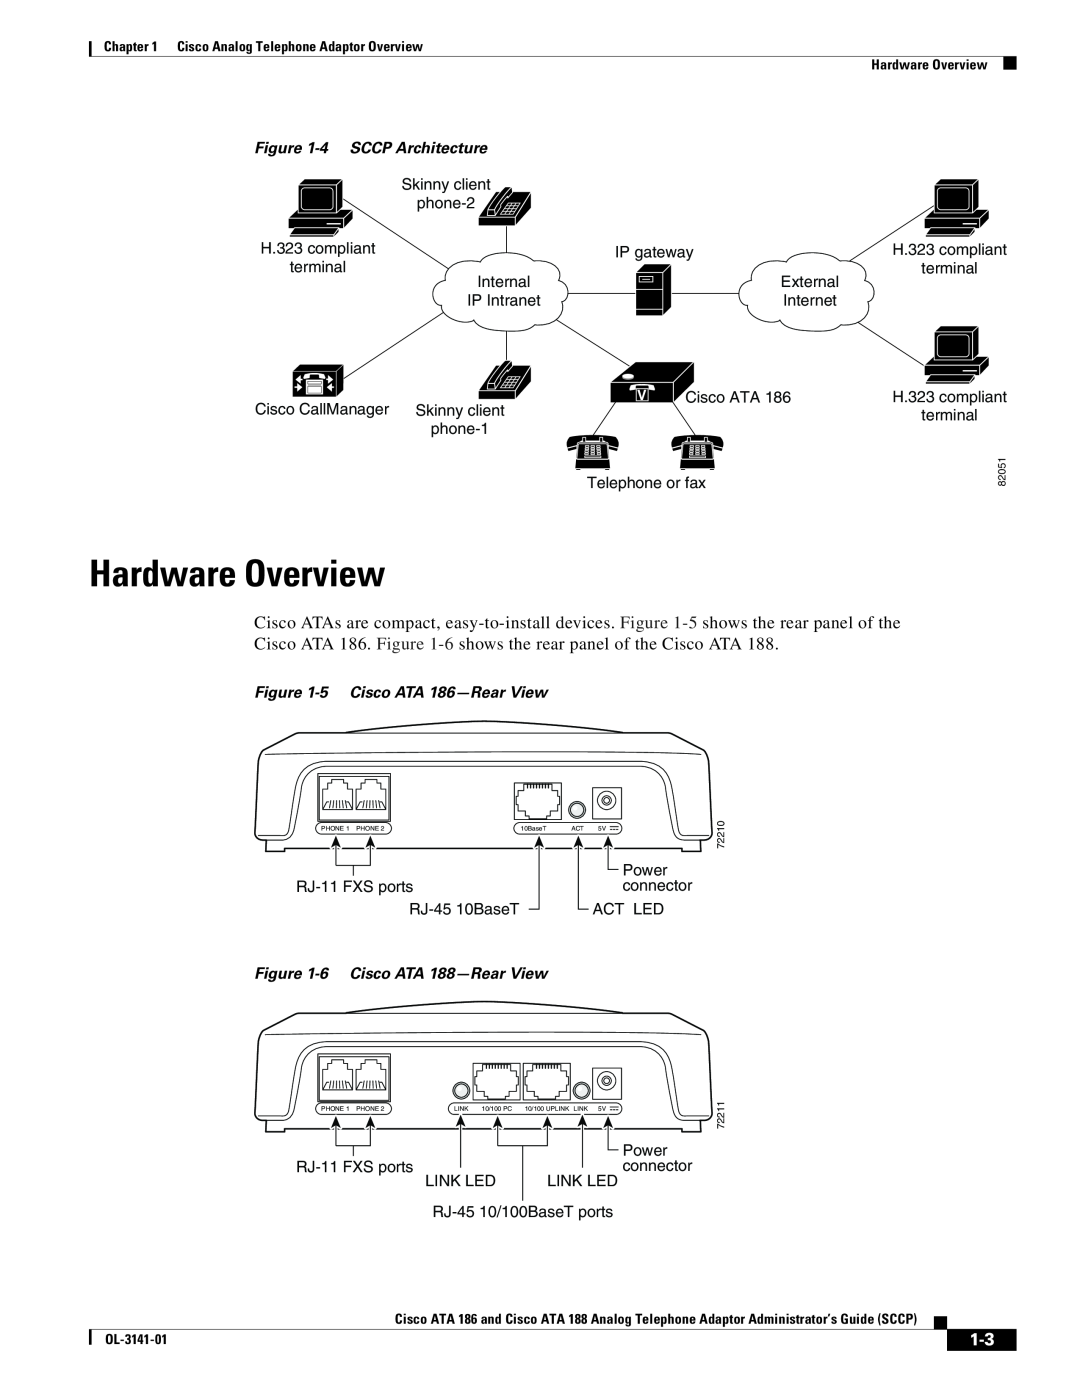 Cisco Systems ATA 188 Hardware Overview, 4 SCCP Architecture, 5 Cisco ATA 186-Rear View, Power, RJ-11 FXS ports, 82051 